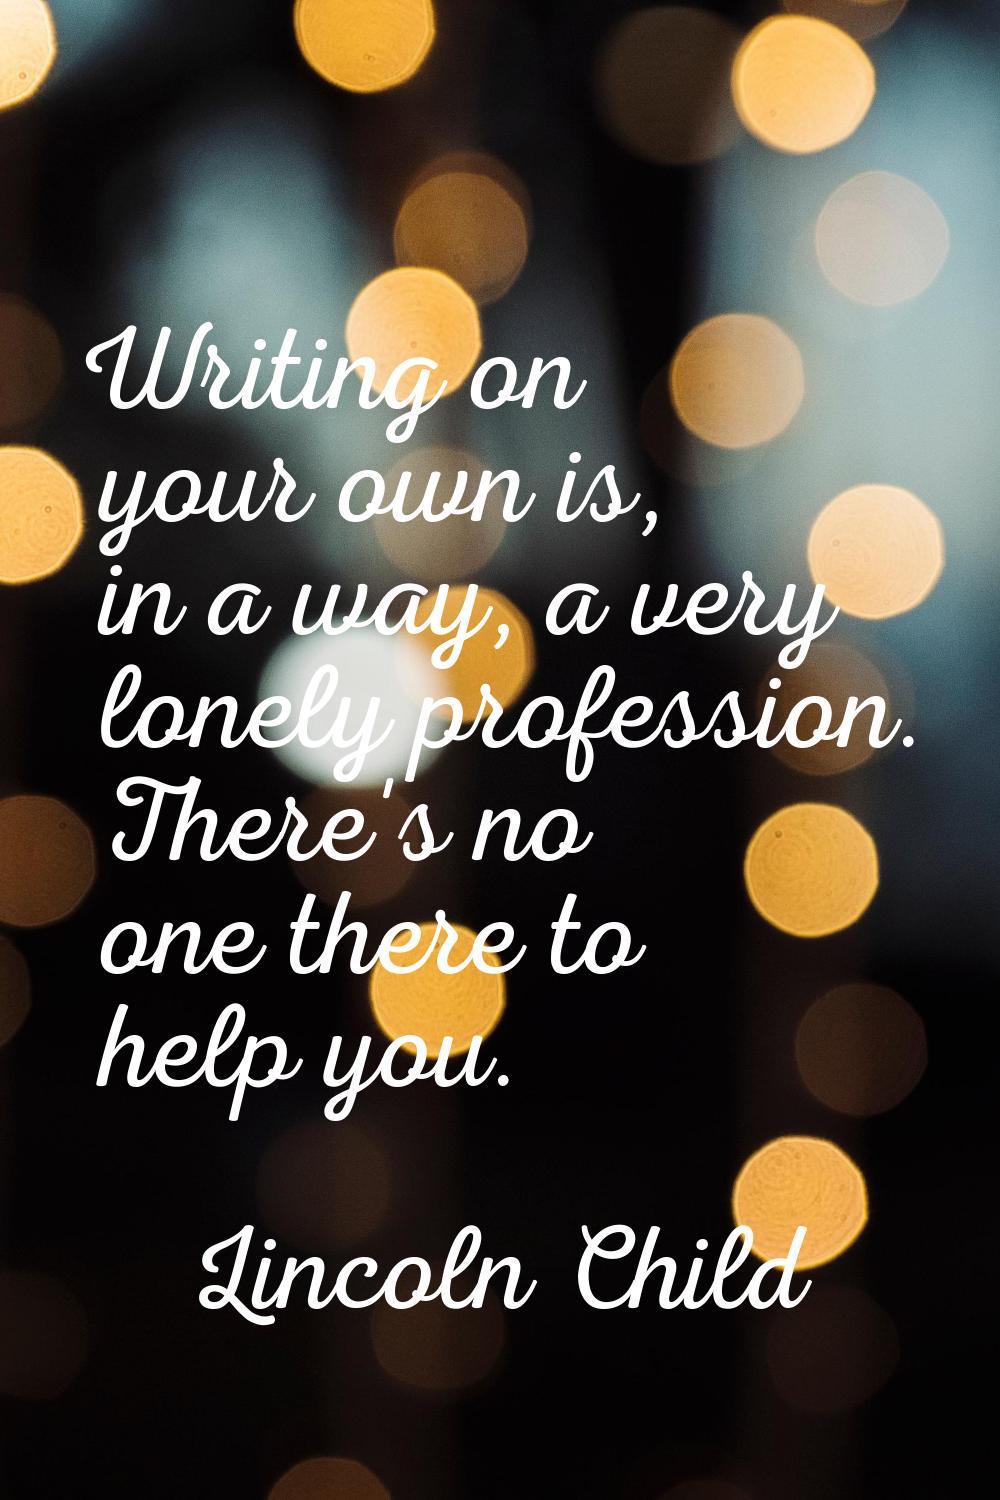 Writing on your own is, in a way, a very lonely profession. There's no one there to help you.